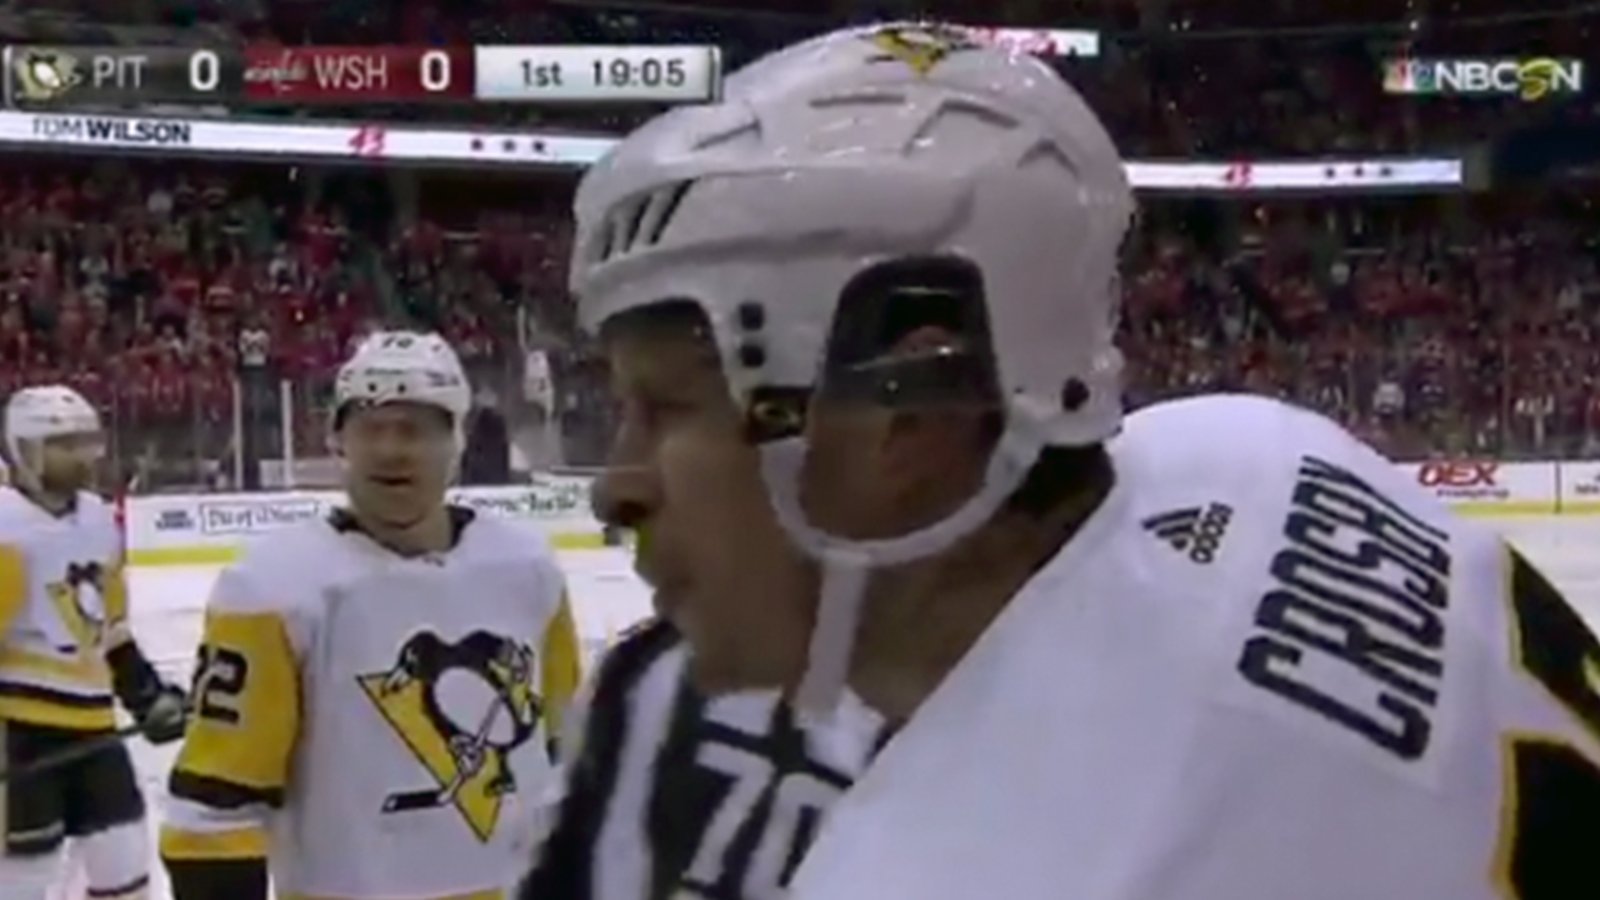 Crosby and Ovechkin go at it between the benches